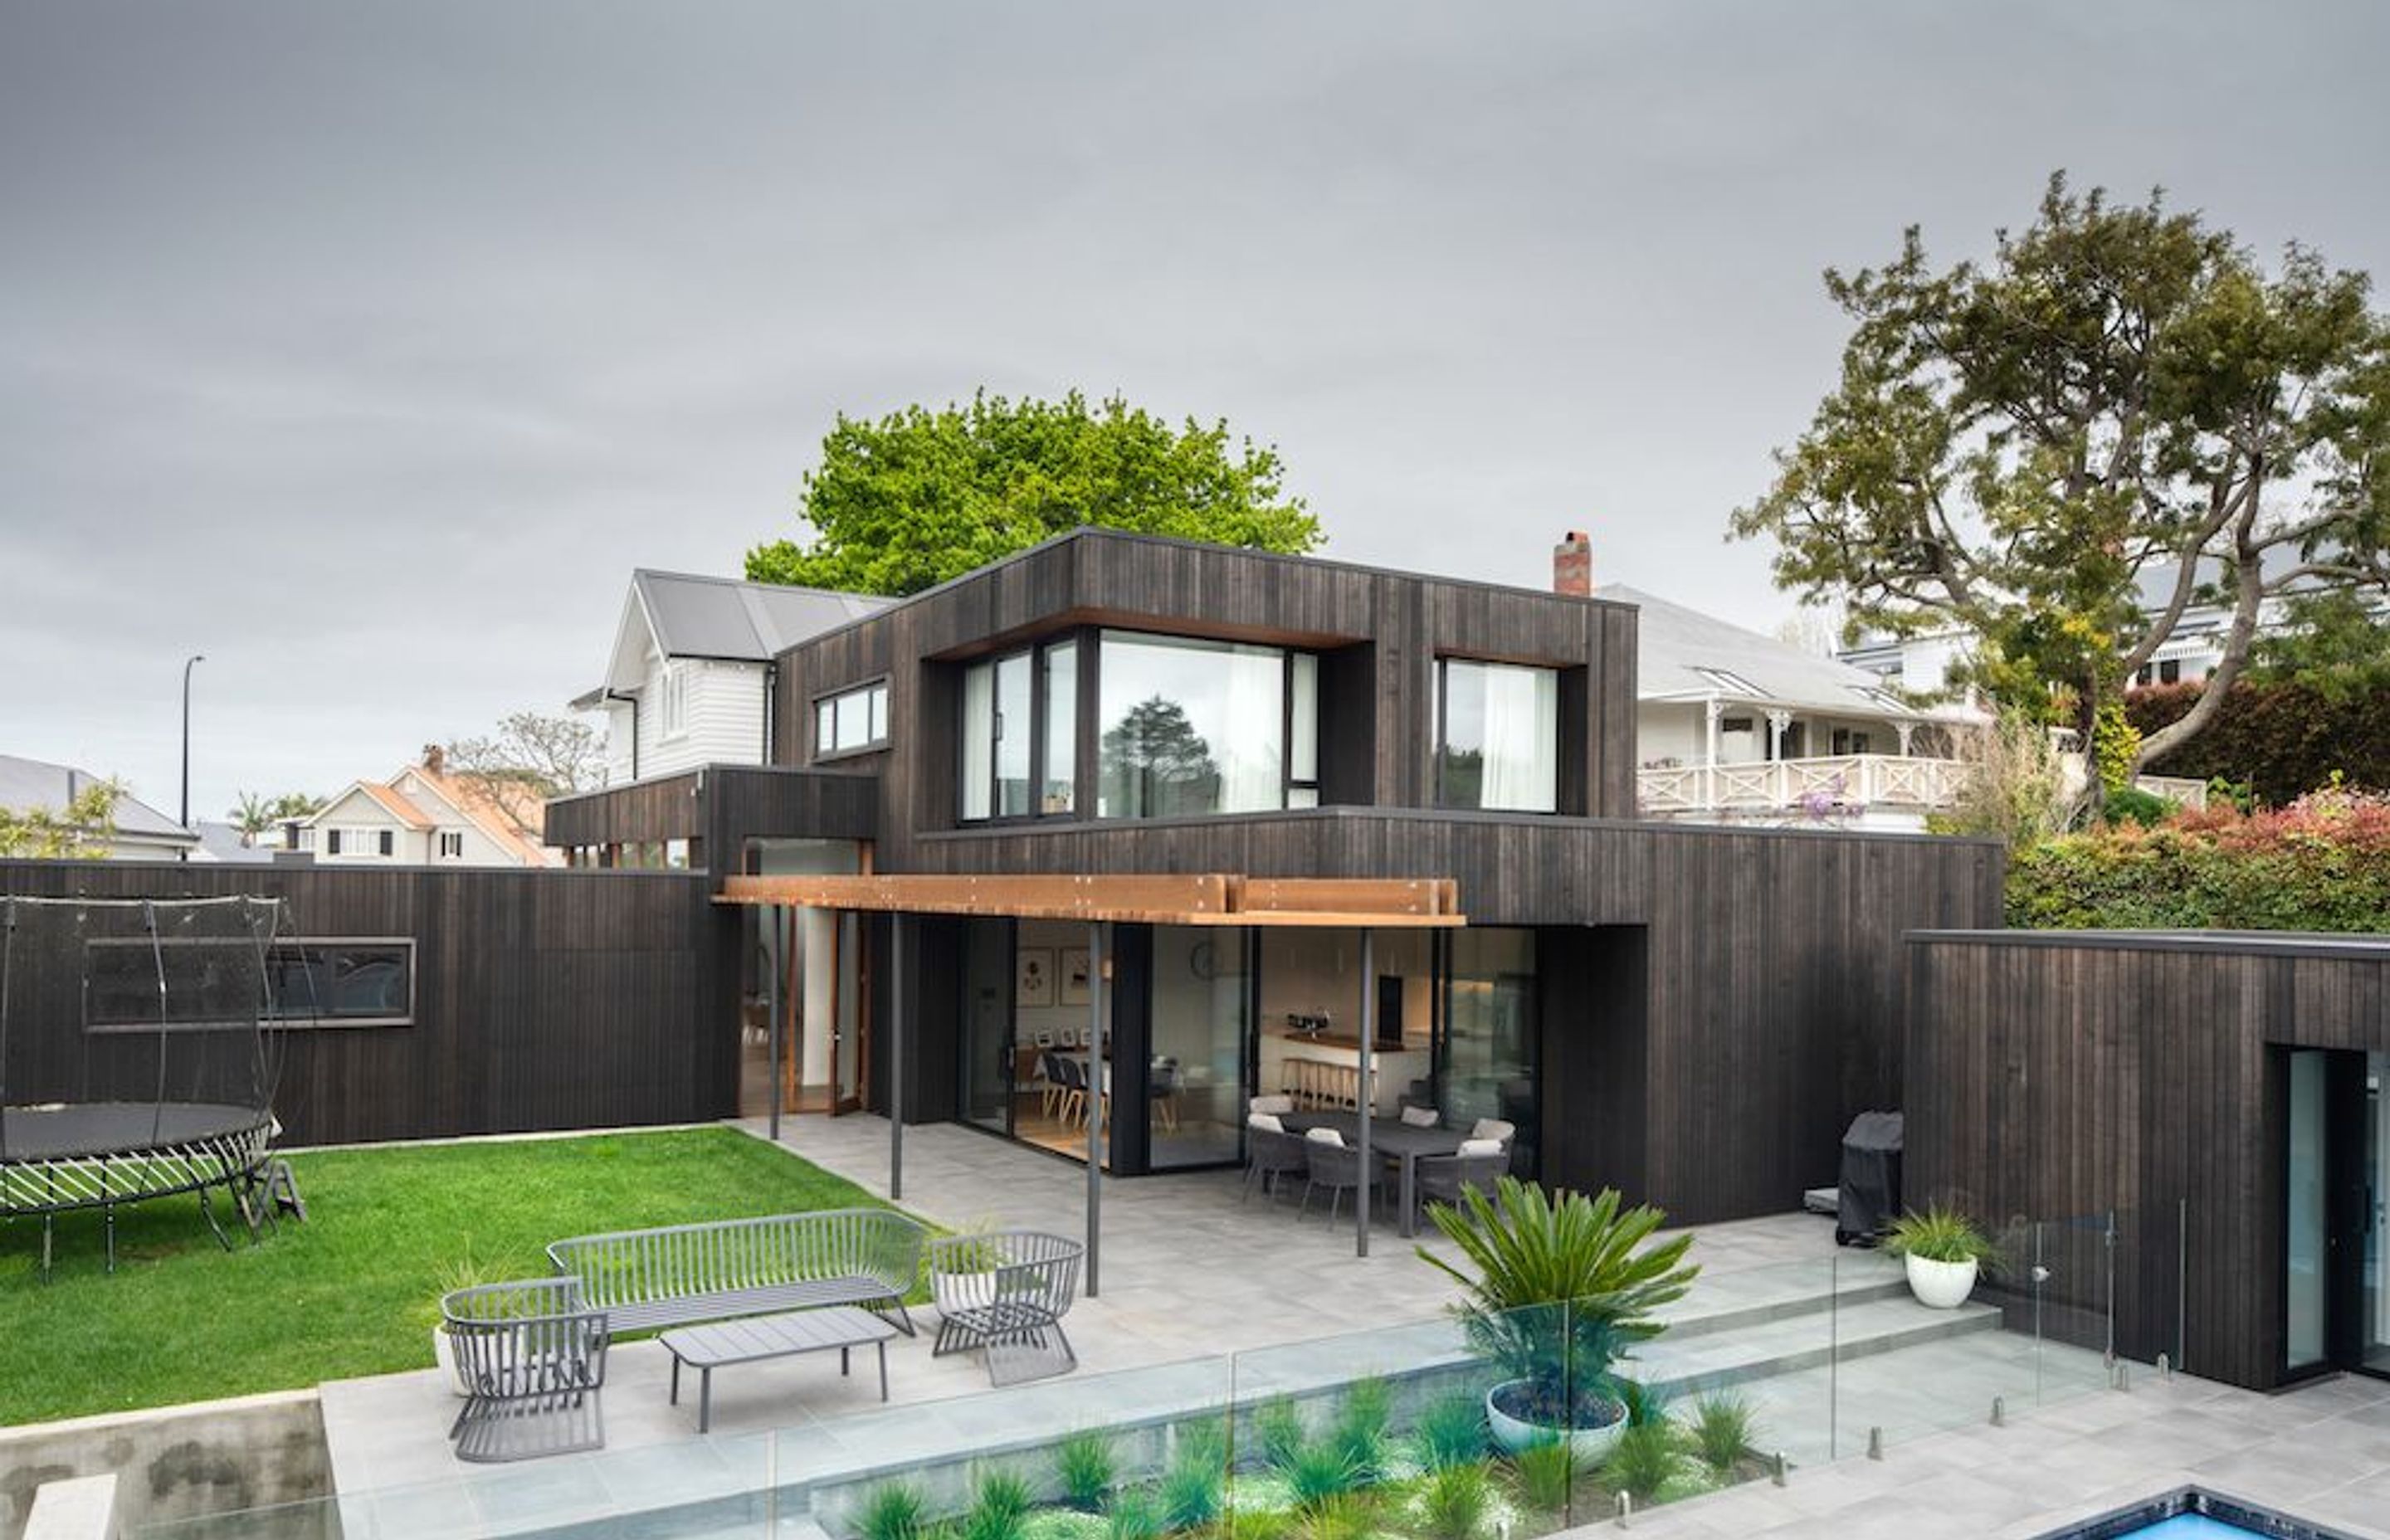 The addition to this bungalow is in the form of five 'boxes' clad in dark, vertical cedar that wrap around and connect with the horizontal weatherboards of the original home. 